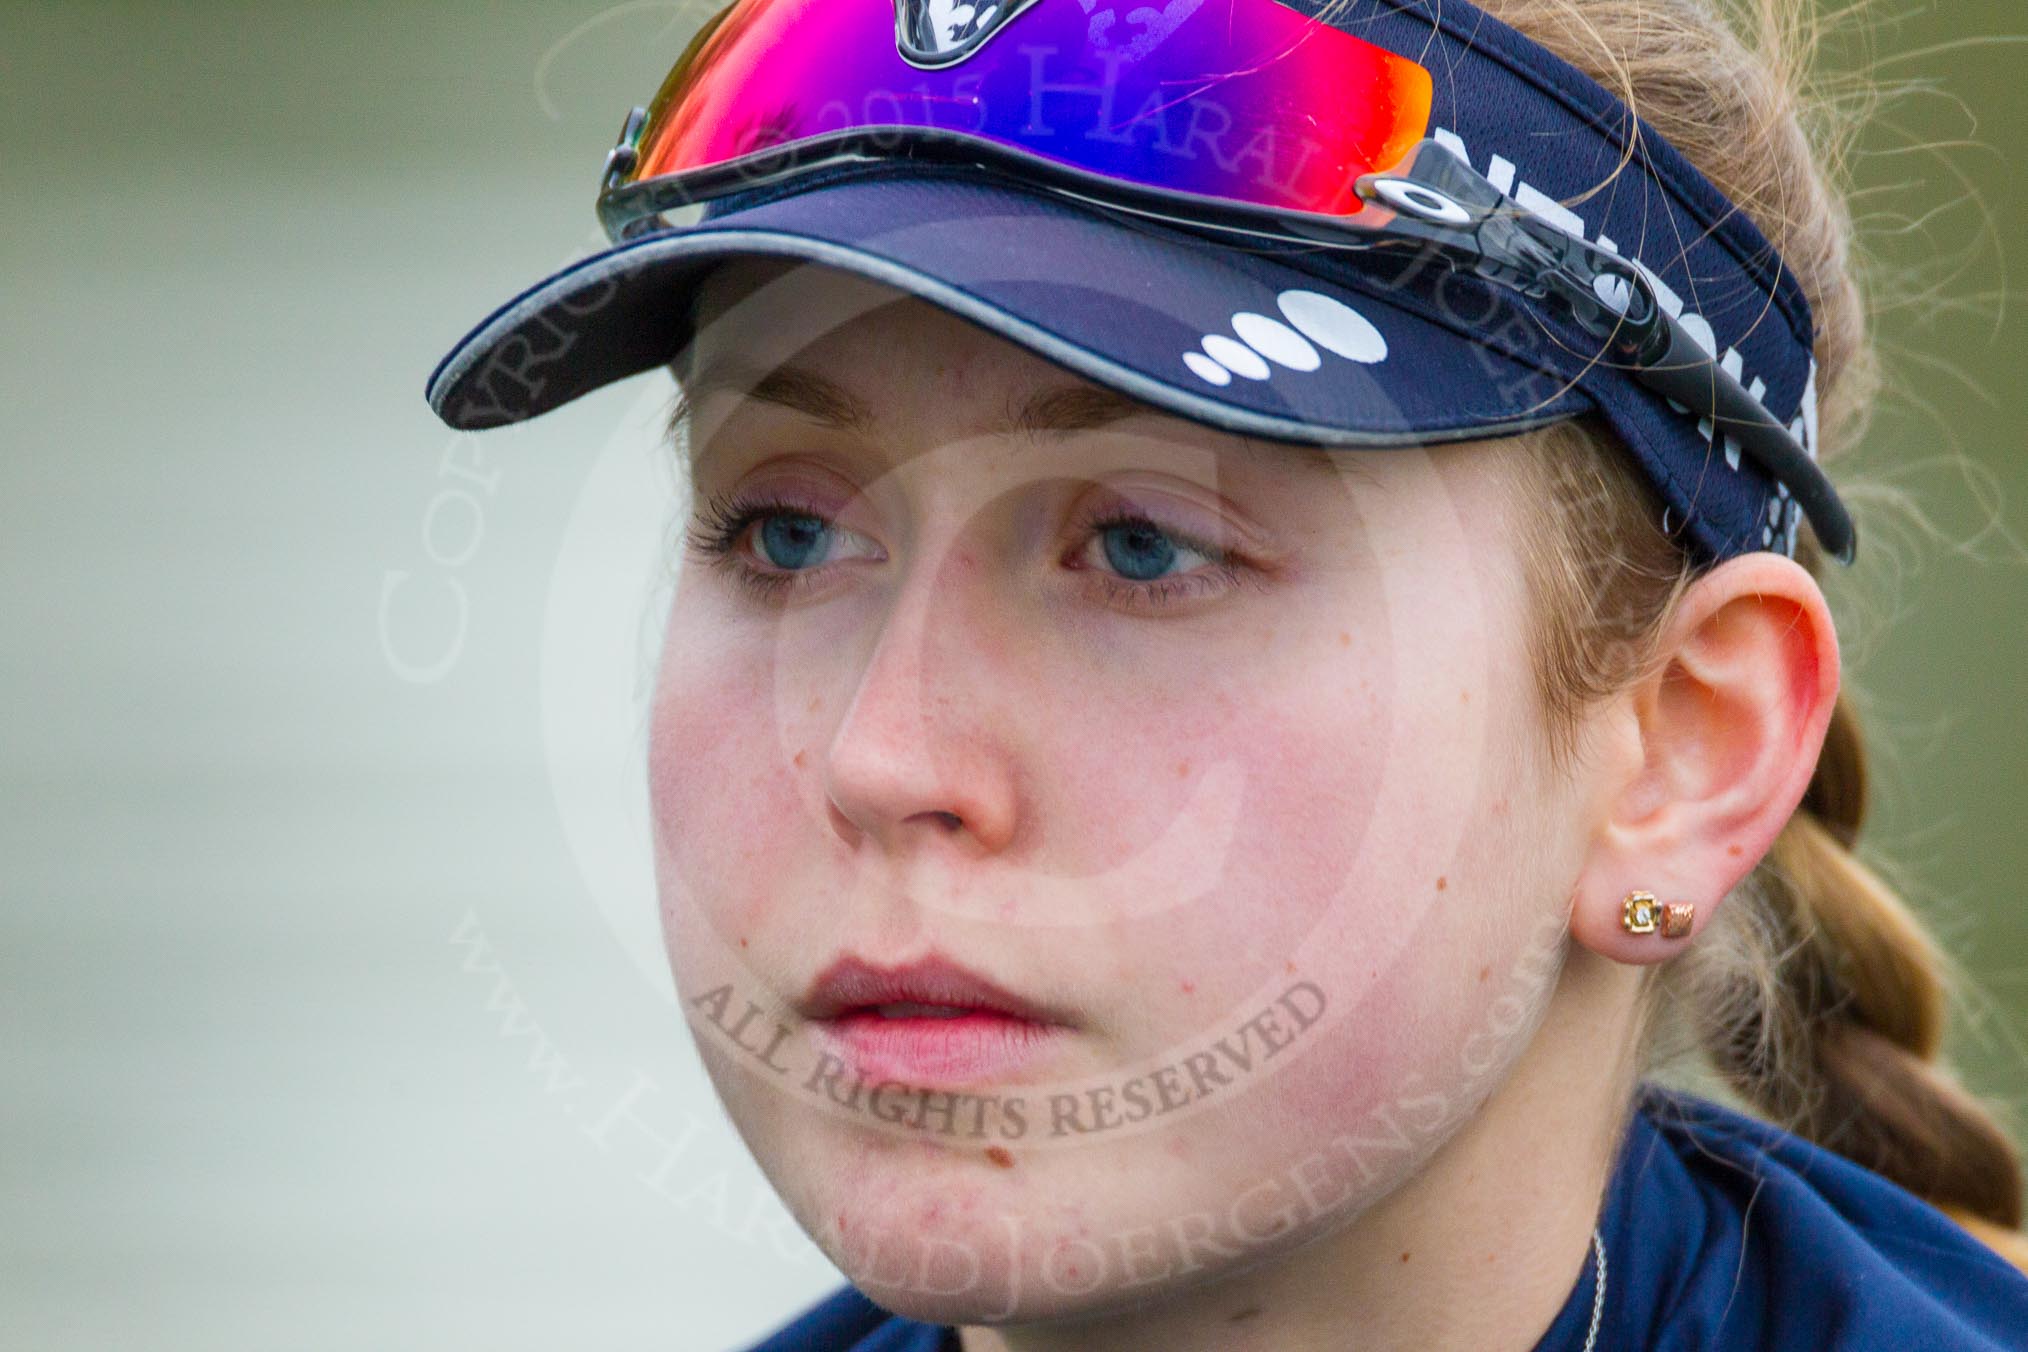 The Boat Race season 2016 - OUWBC training Wallingford: Maddy Badcott, OUWBC president and 7 seat in the Oxford Blue Boat.
River Thames,
Wallingford,
Oxfordshire,

on 29 February 2016 at 15:51, image #68